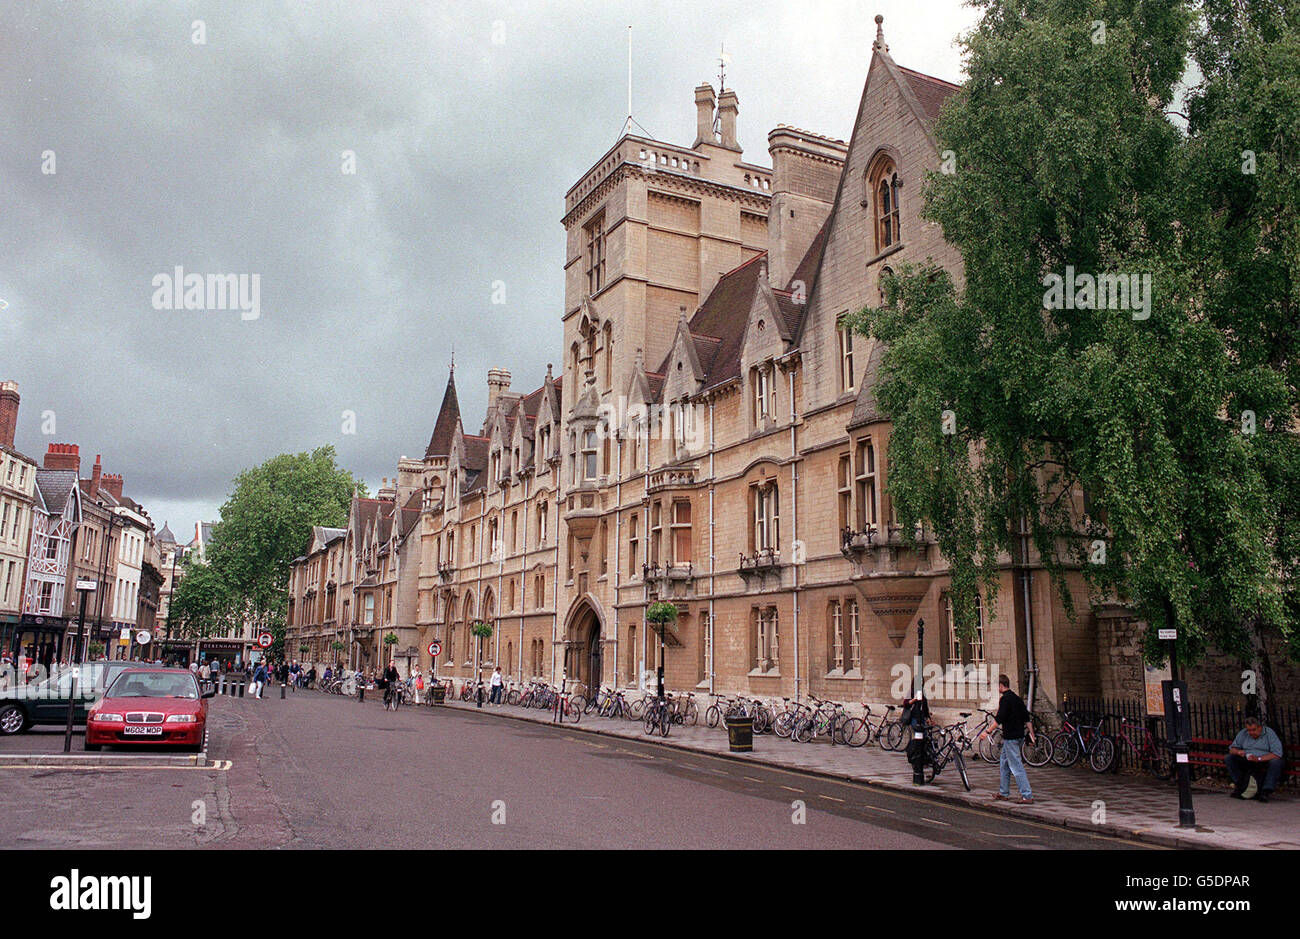 OXFORD: A view of Balliol College, one of the colleges which make up Oxford University, on Broad Street ('the Broad') in Oxford. Stock Photo